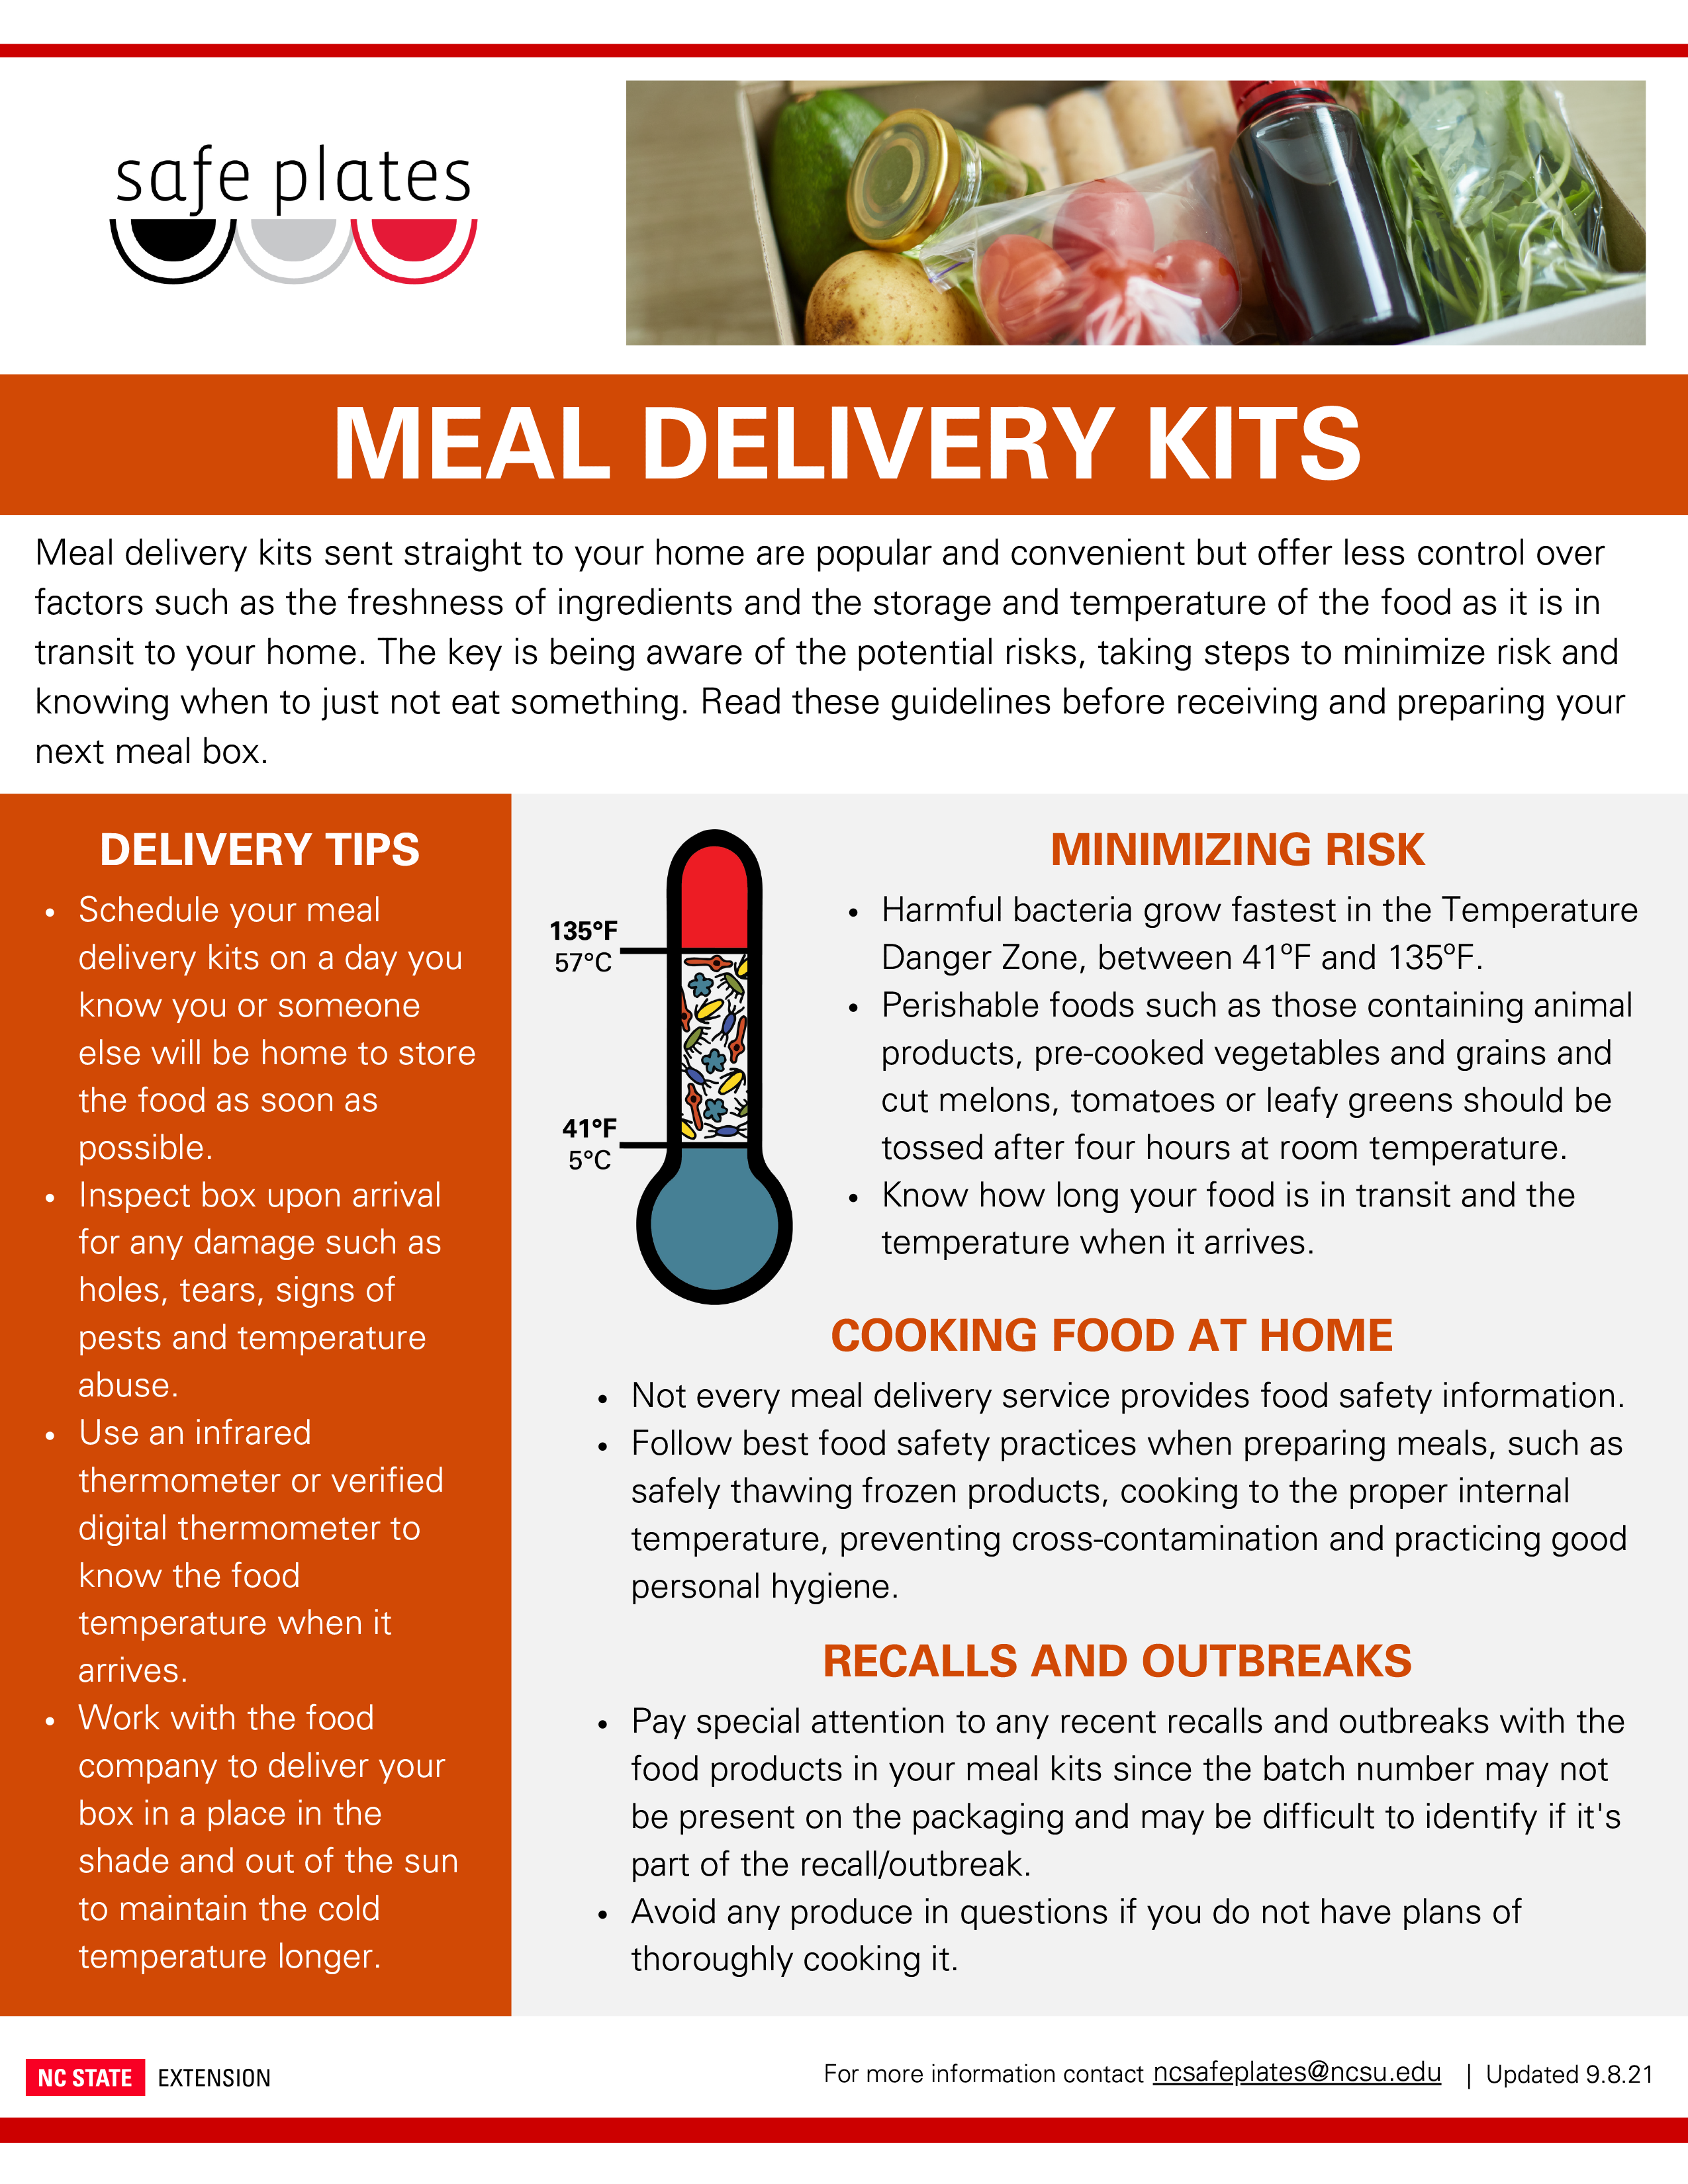 Meal kits make cooking at home a snap during coronavirus outbreak